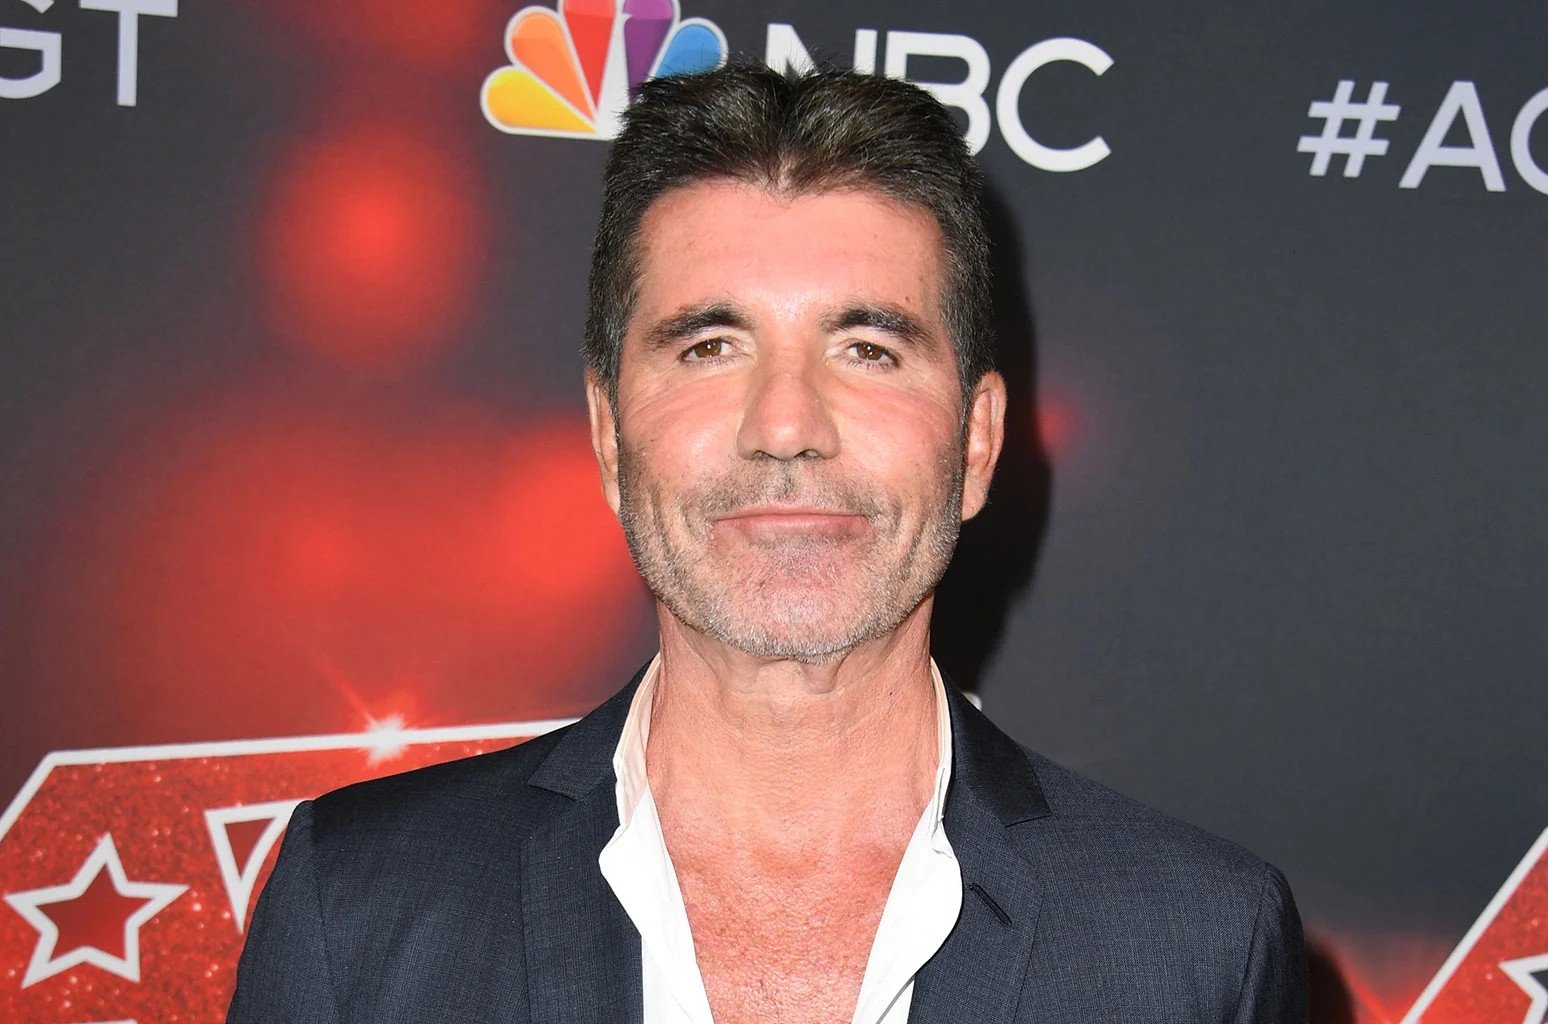 Simon Cowell Shows Support For Harry Styles After Spitgate Incident